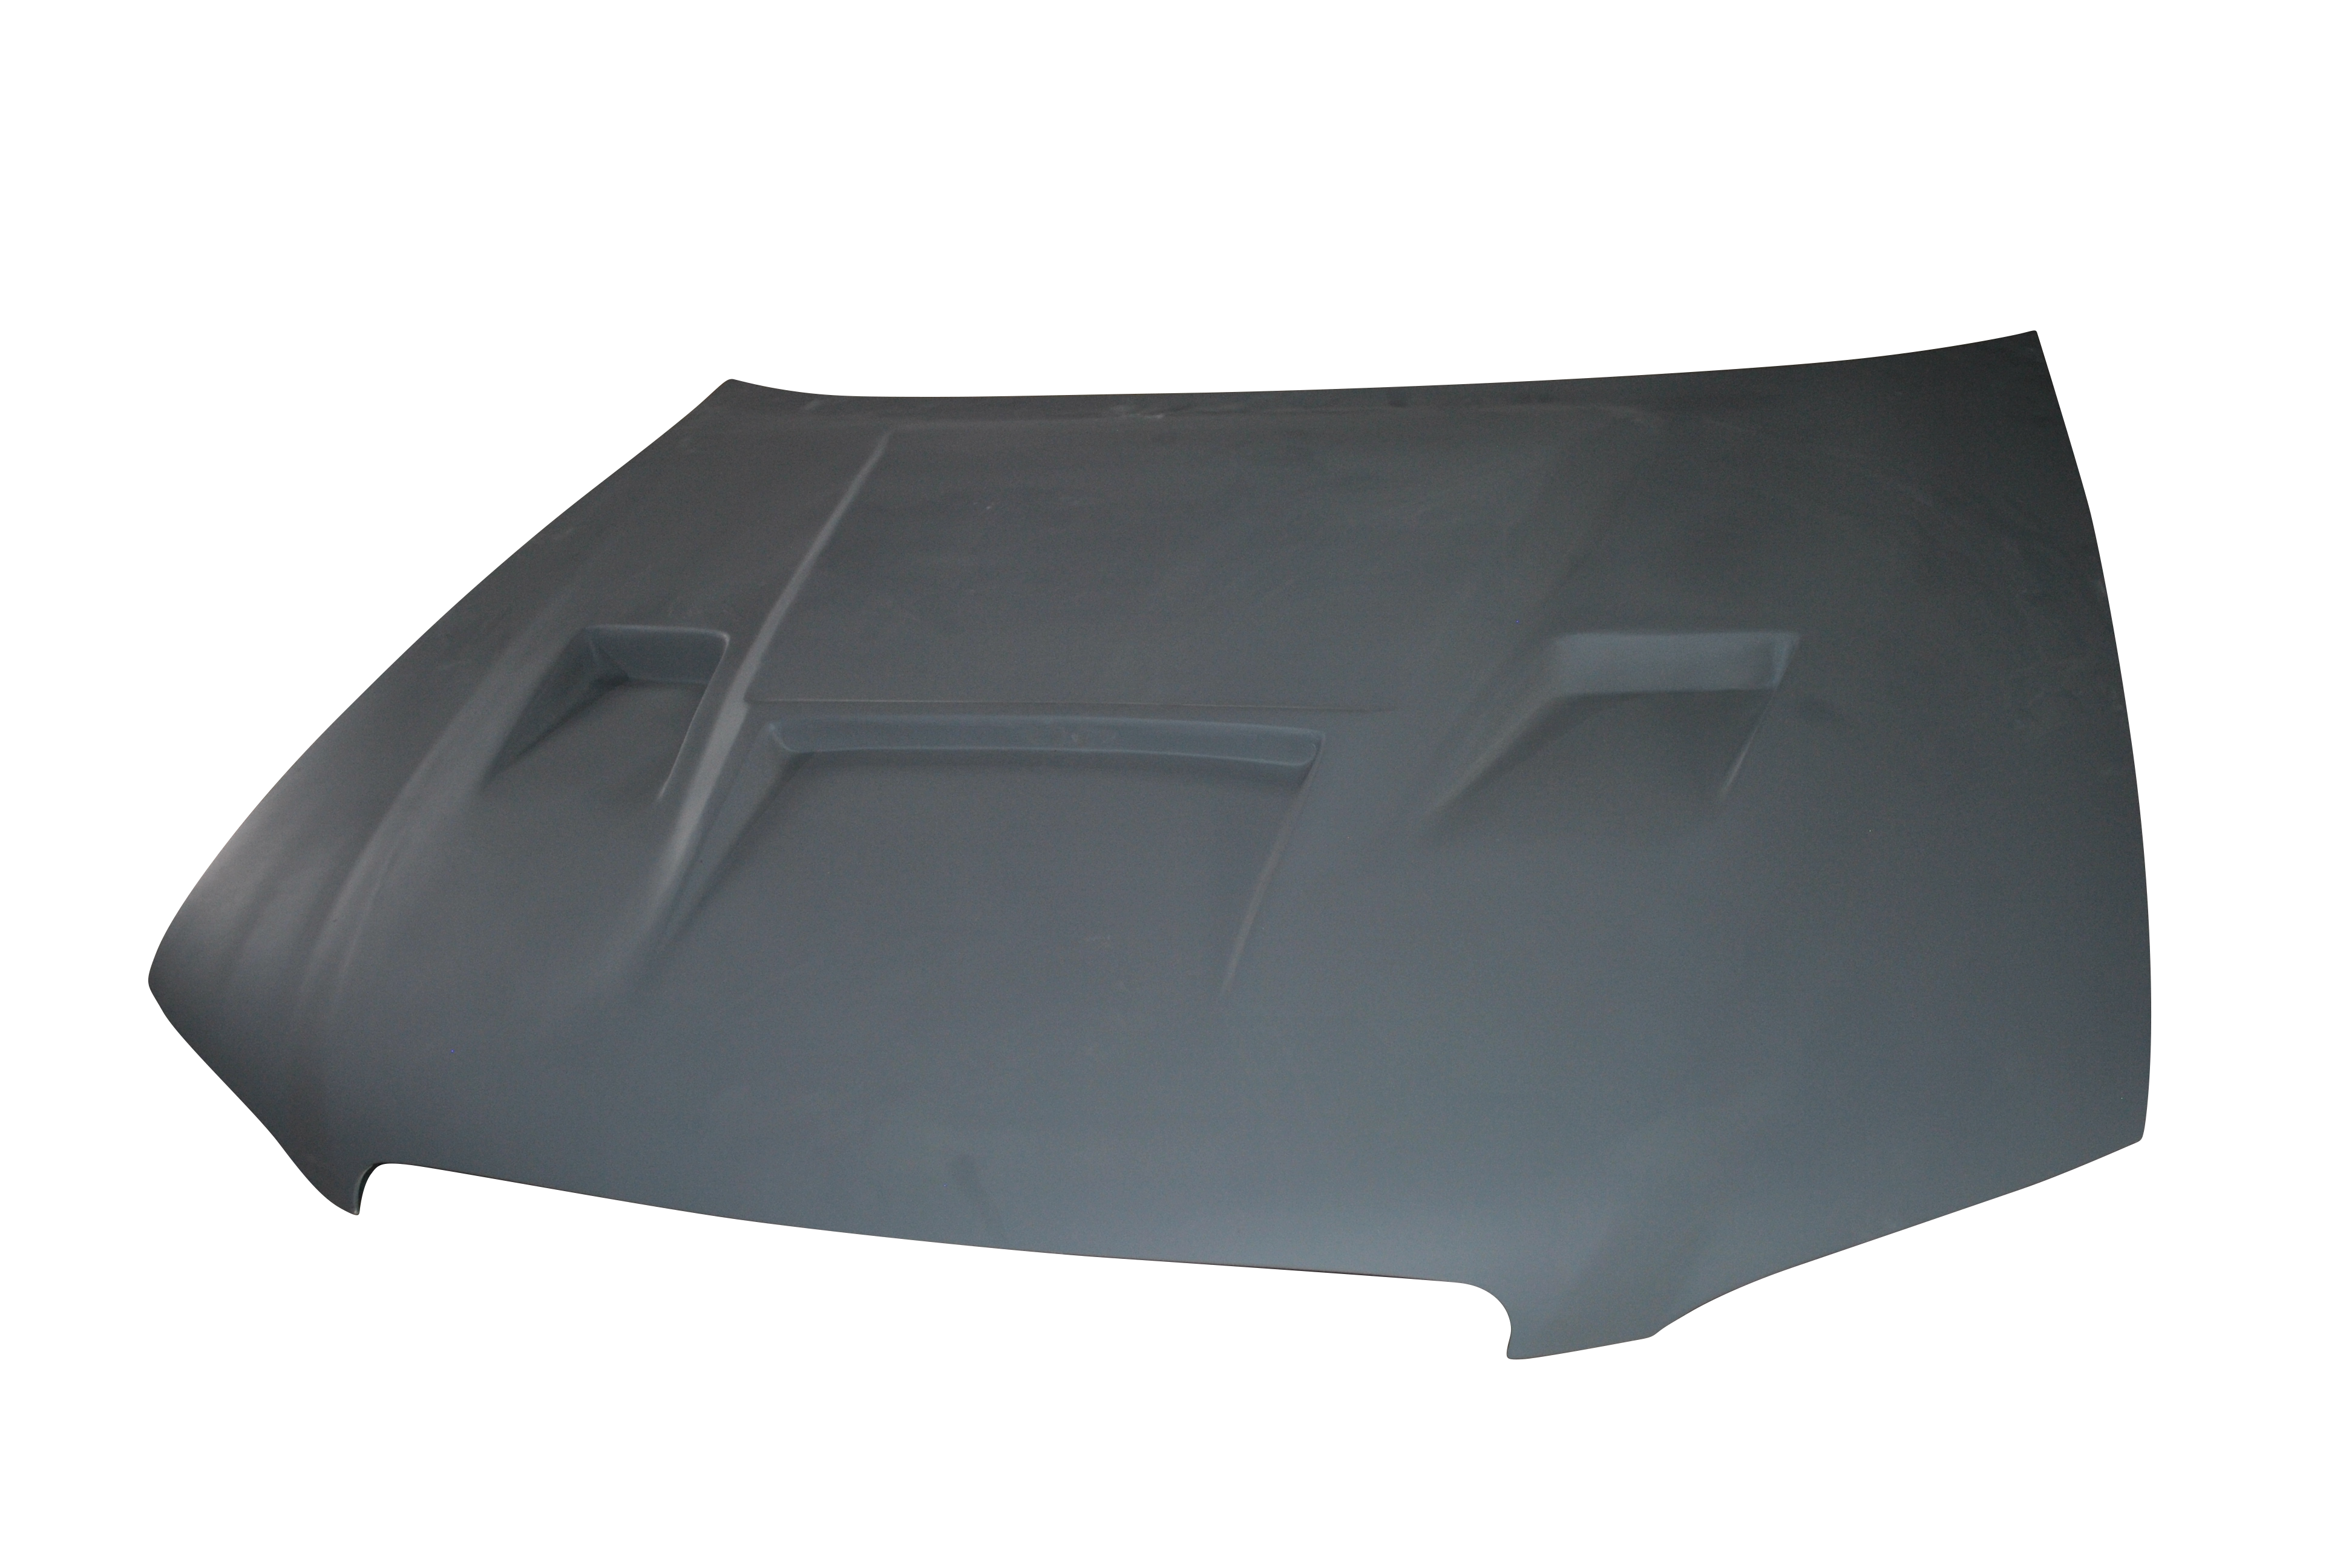 BA steel bonnet with BA Bulge with Slits and Vents Moulded